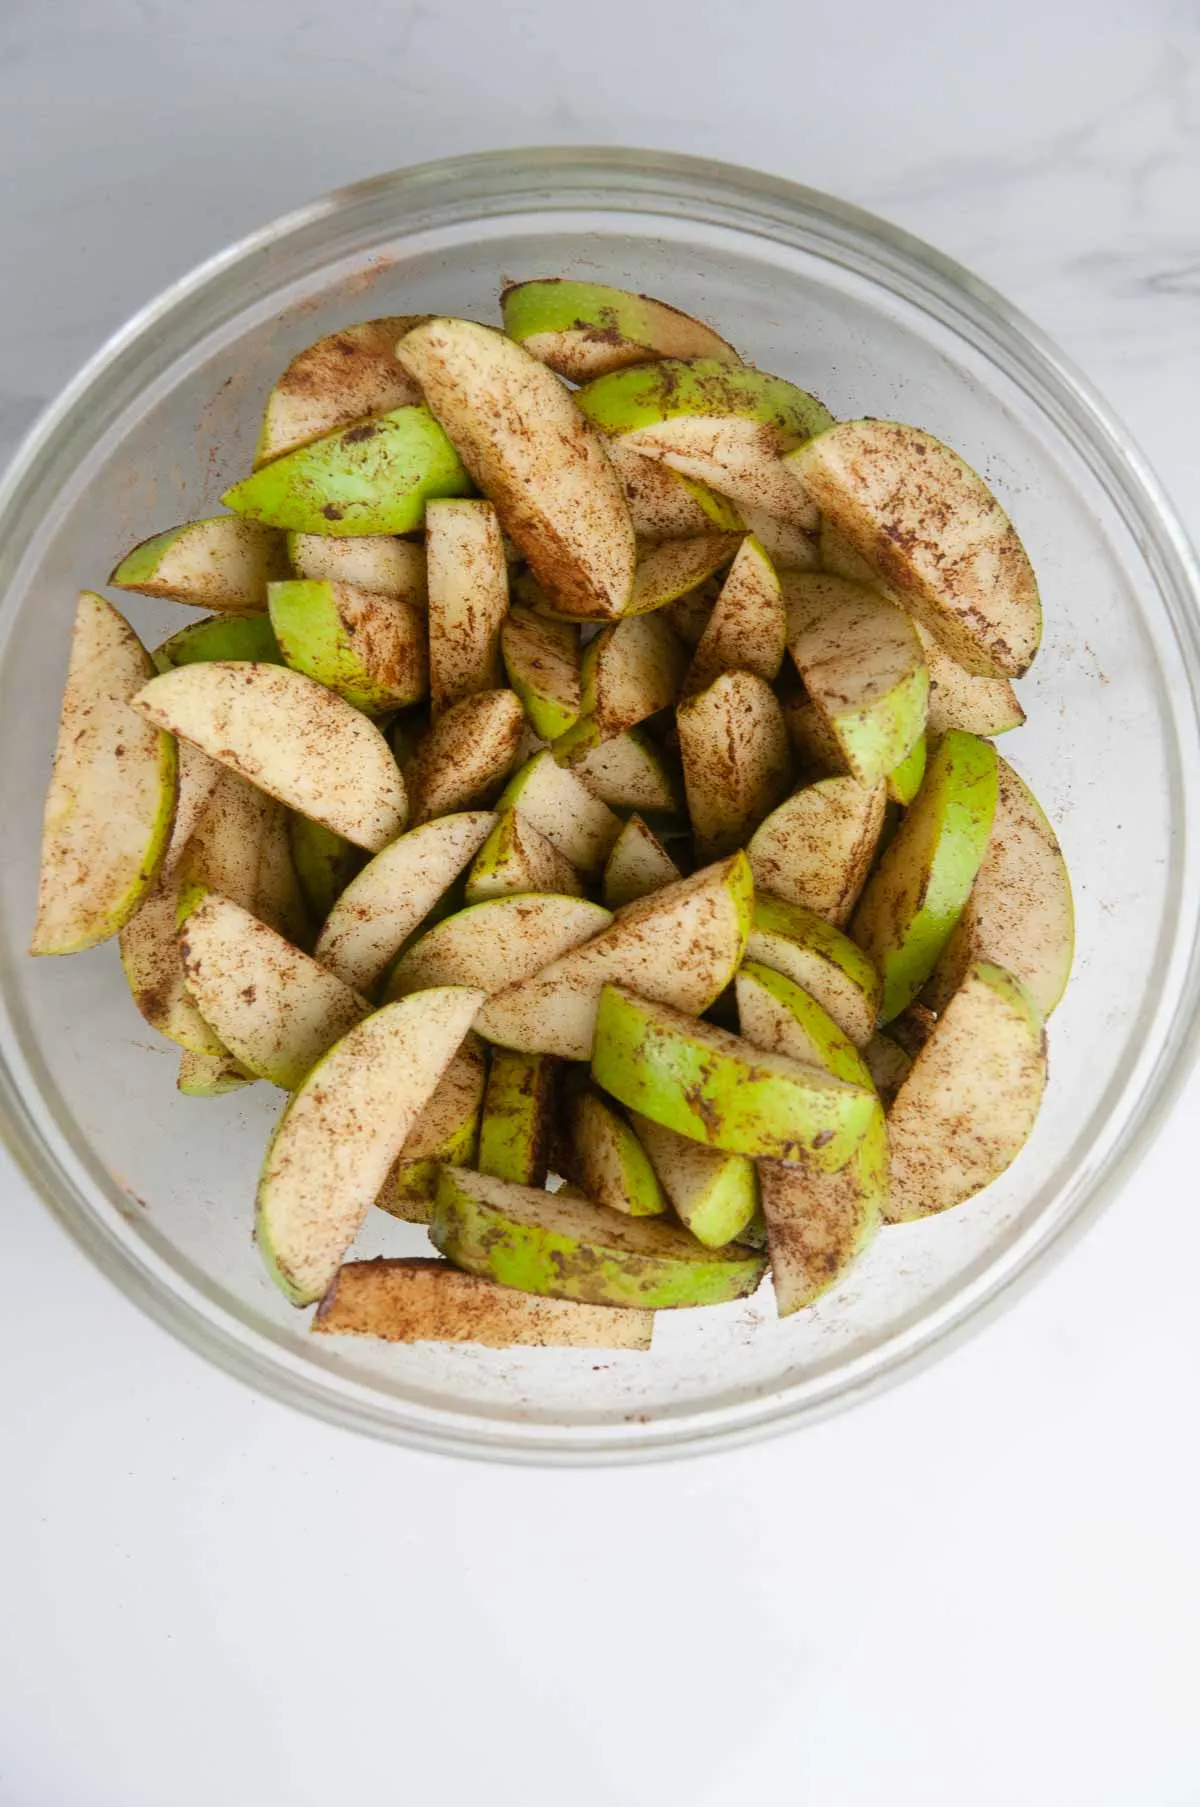 Toss the sliced apples with melted butter and cinnamon.